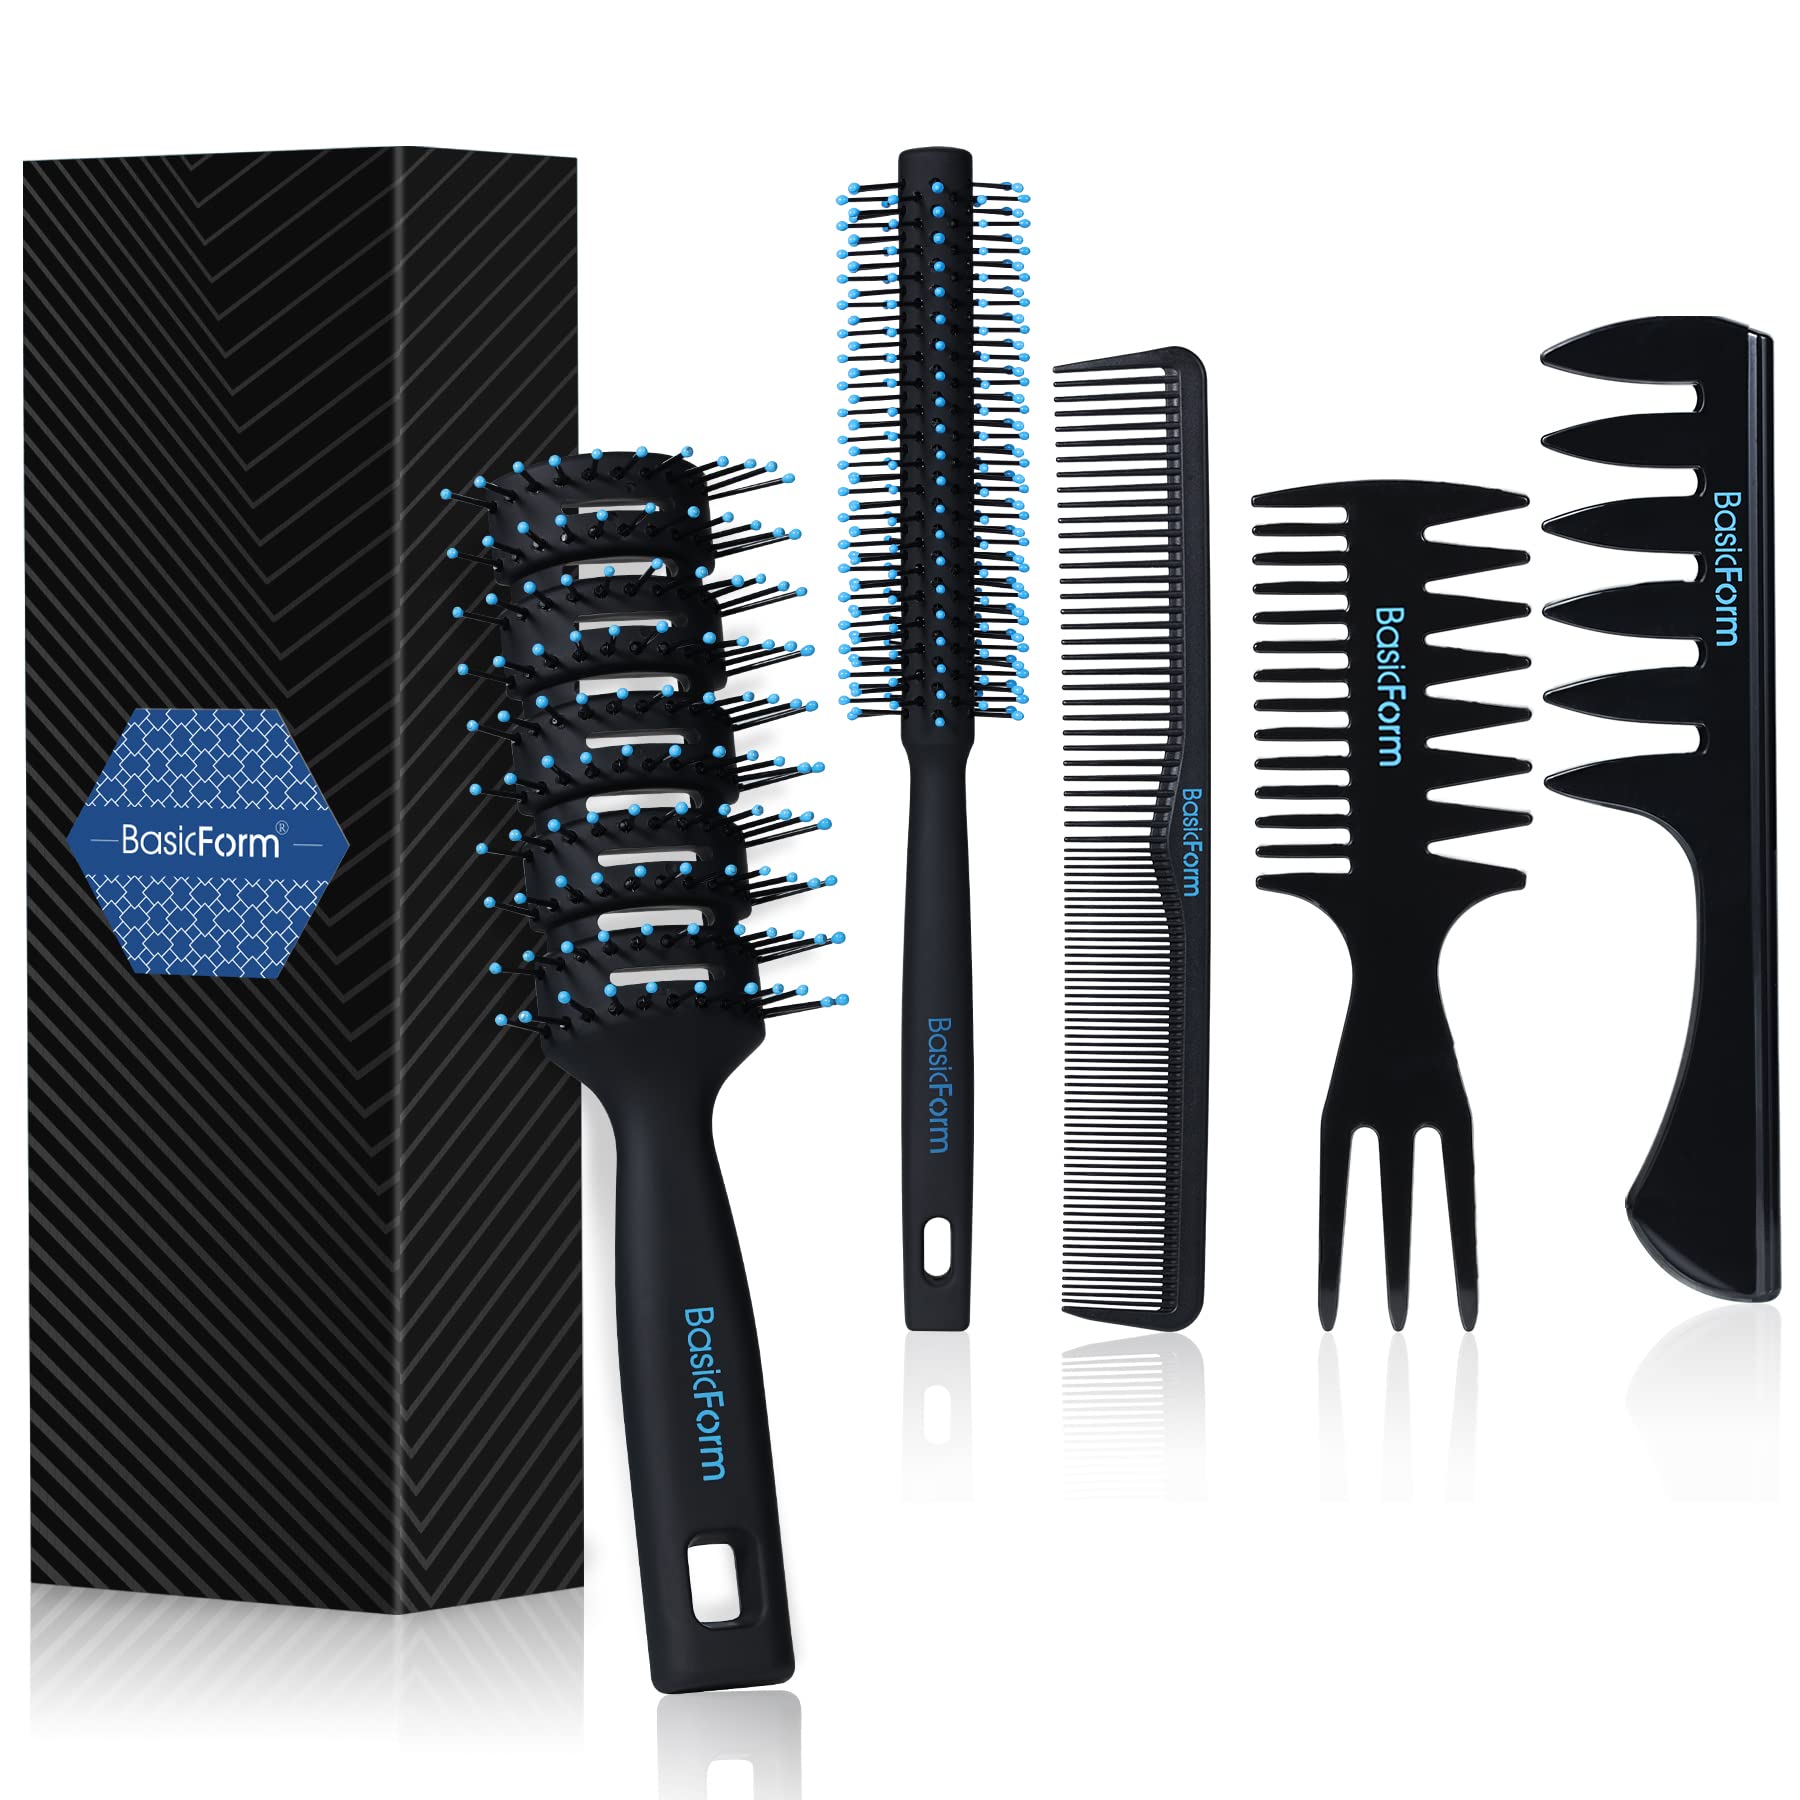 BasicForm Styling Hair Brush and Comb Set for Men, Vent Brush Round Hair  Roller for Quiff,